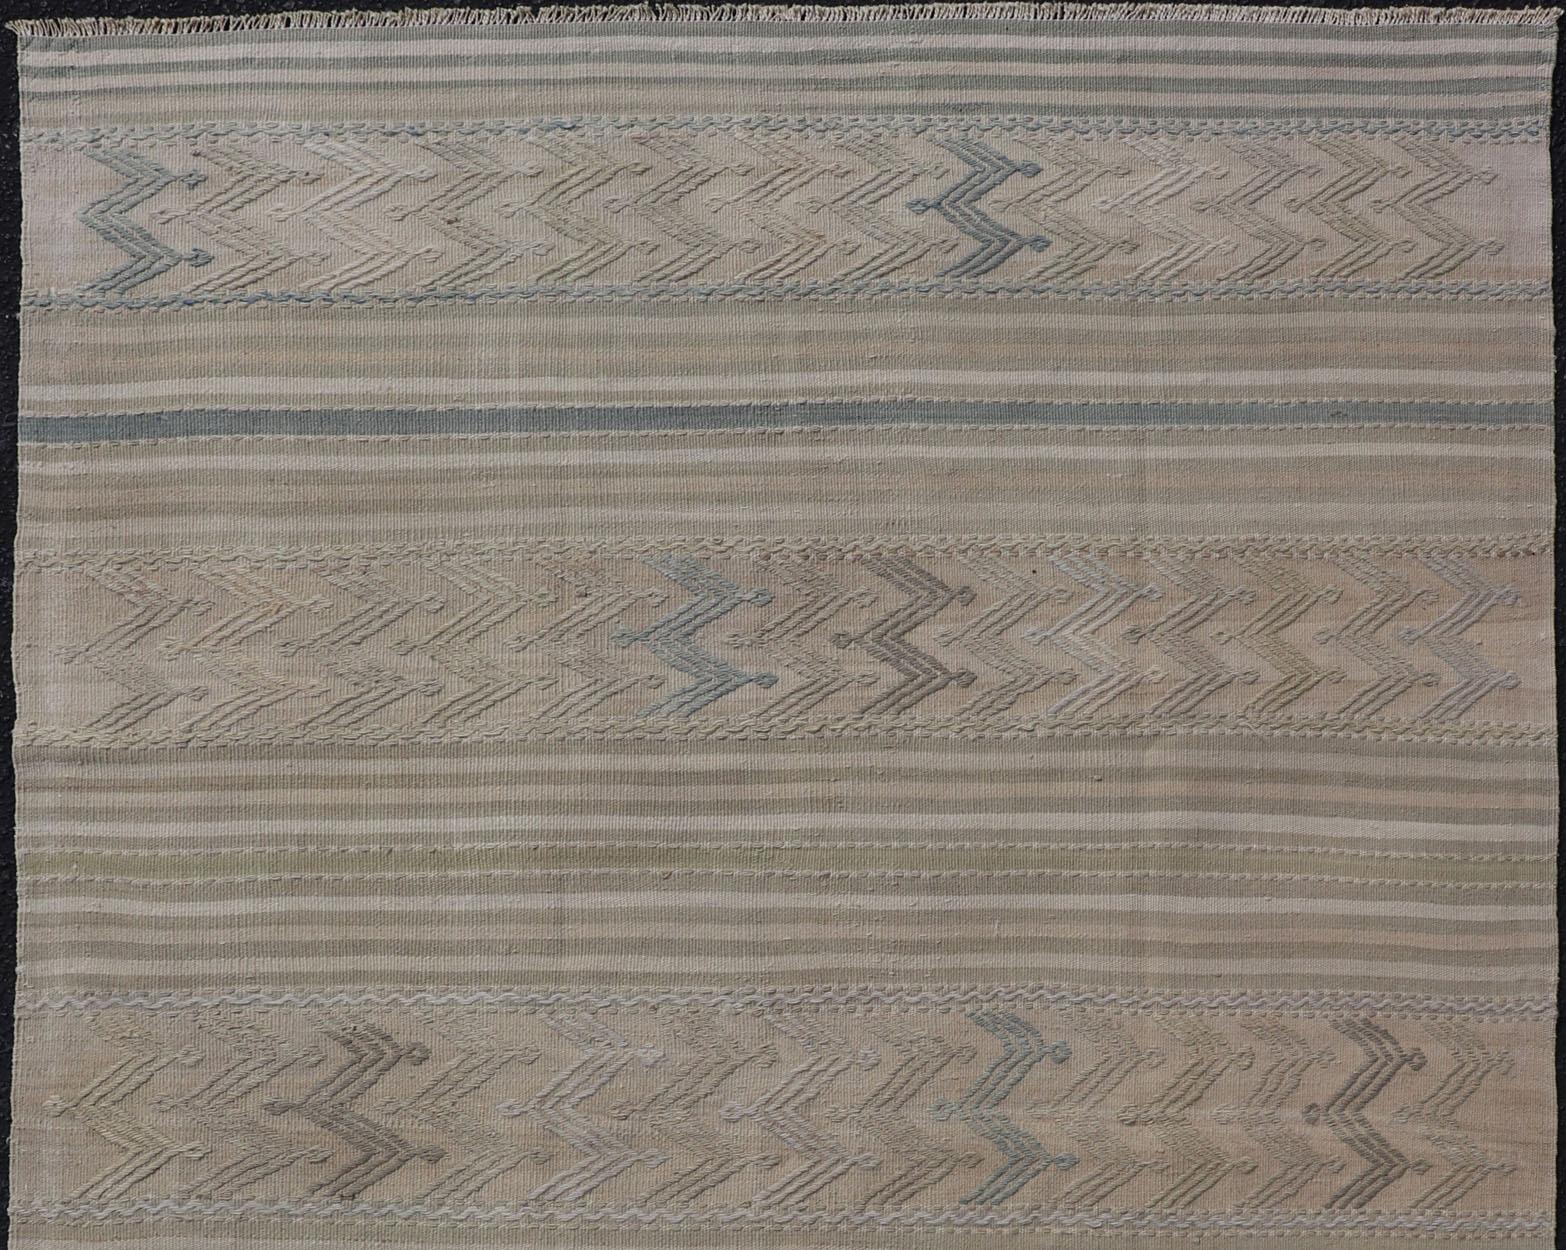 Hand-Woven Vintage Turkish Flat-Weave Muted Colored Kilim in Taupe, Brown and Light Blue For Sale